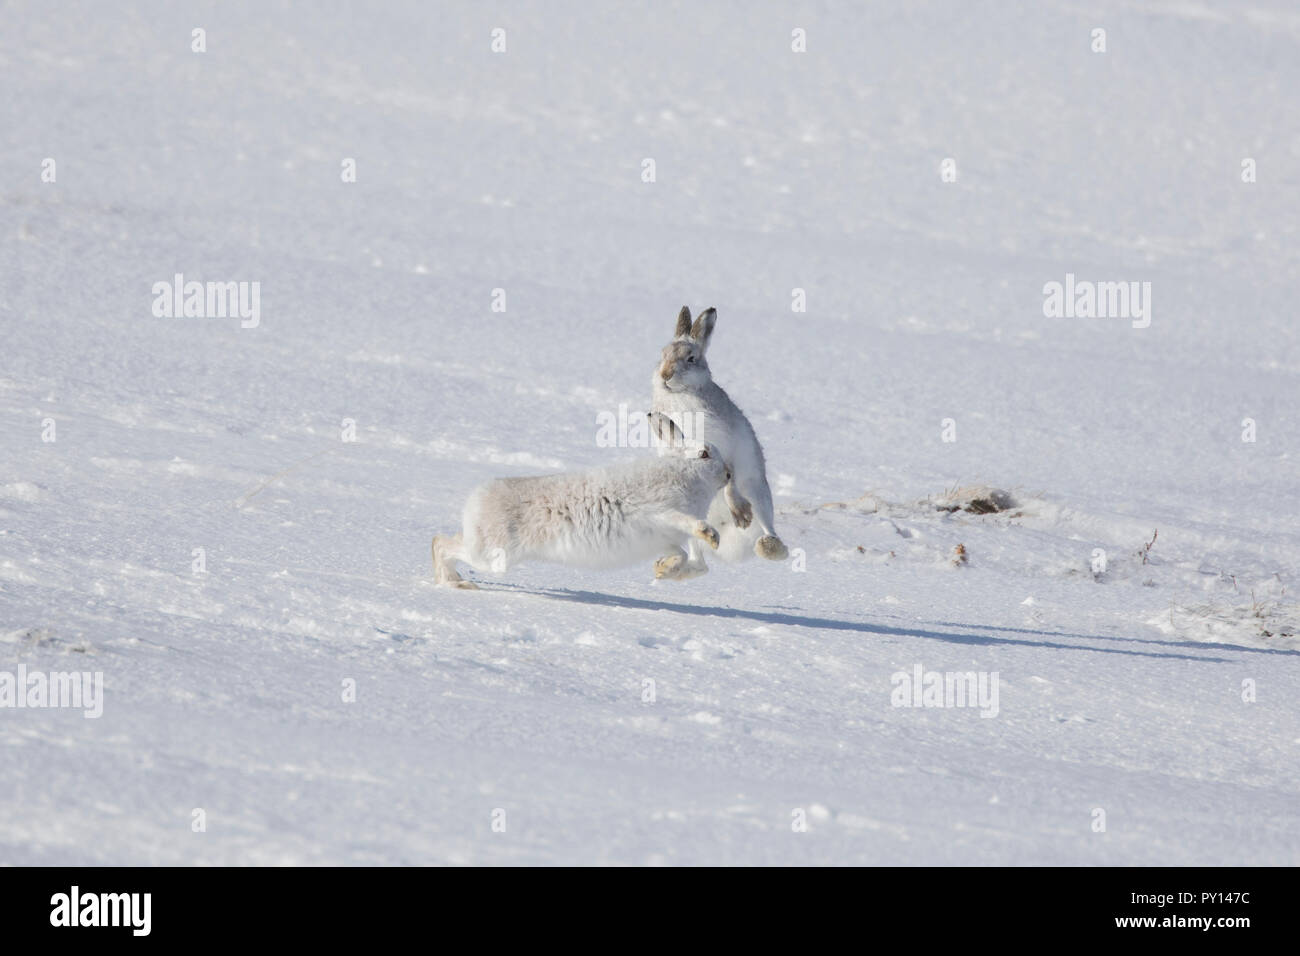 Fighting mountain hare / Alpine hares / snow hare (Lepus timidus) female in white winter pelage fending off male in the snow Stock Photo